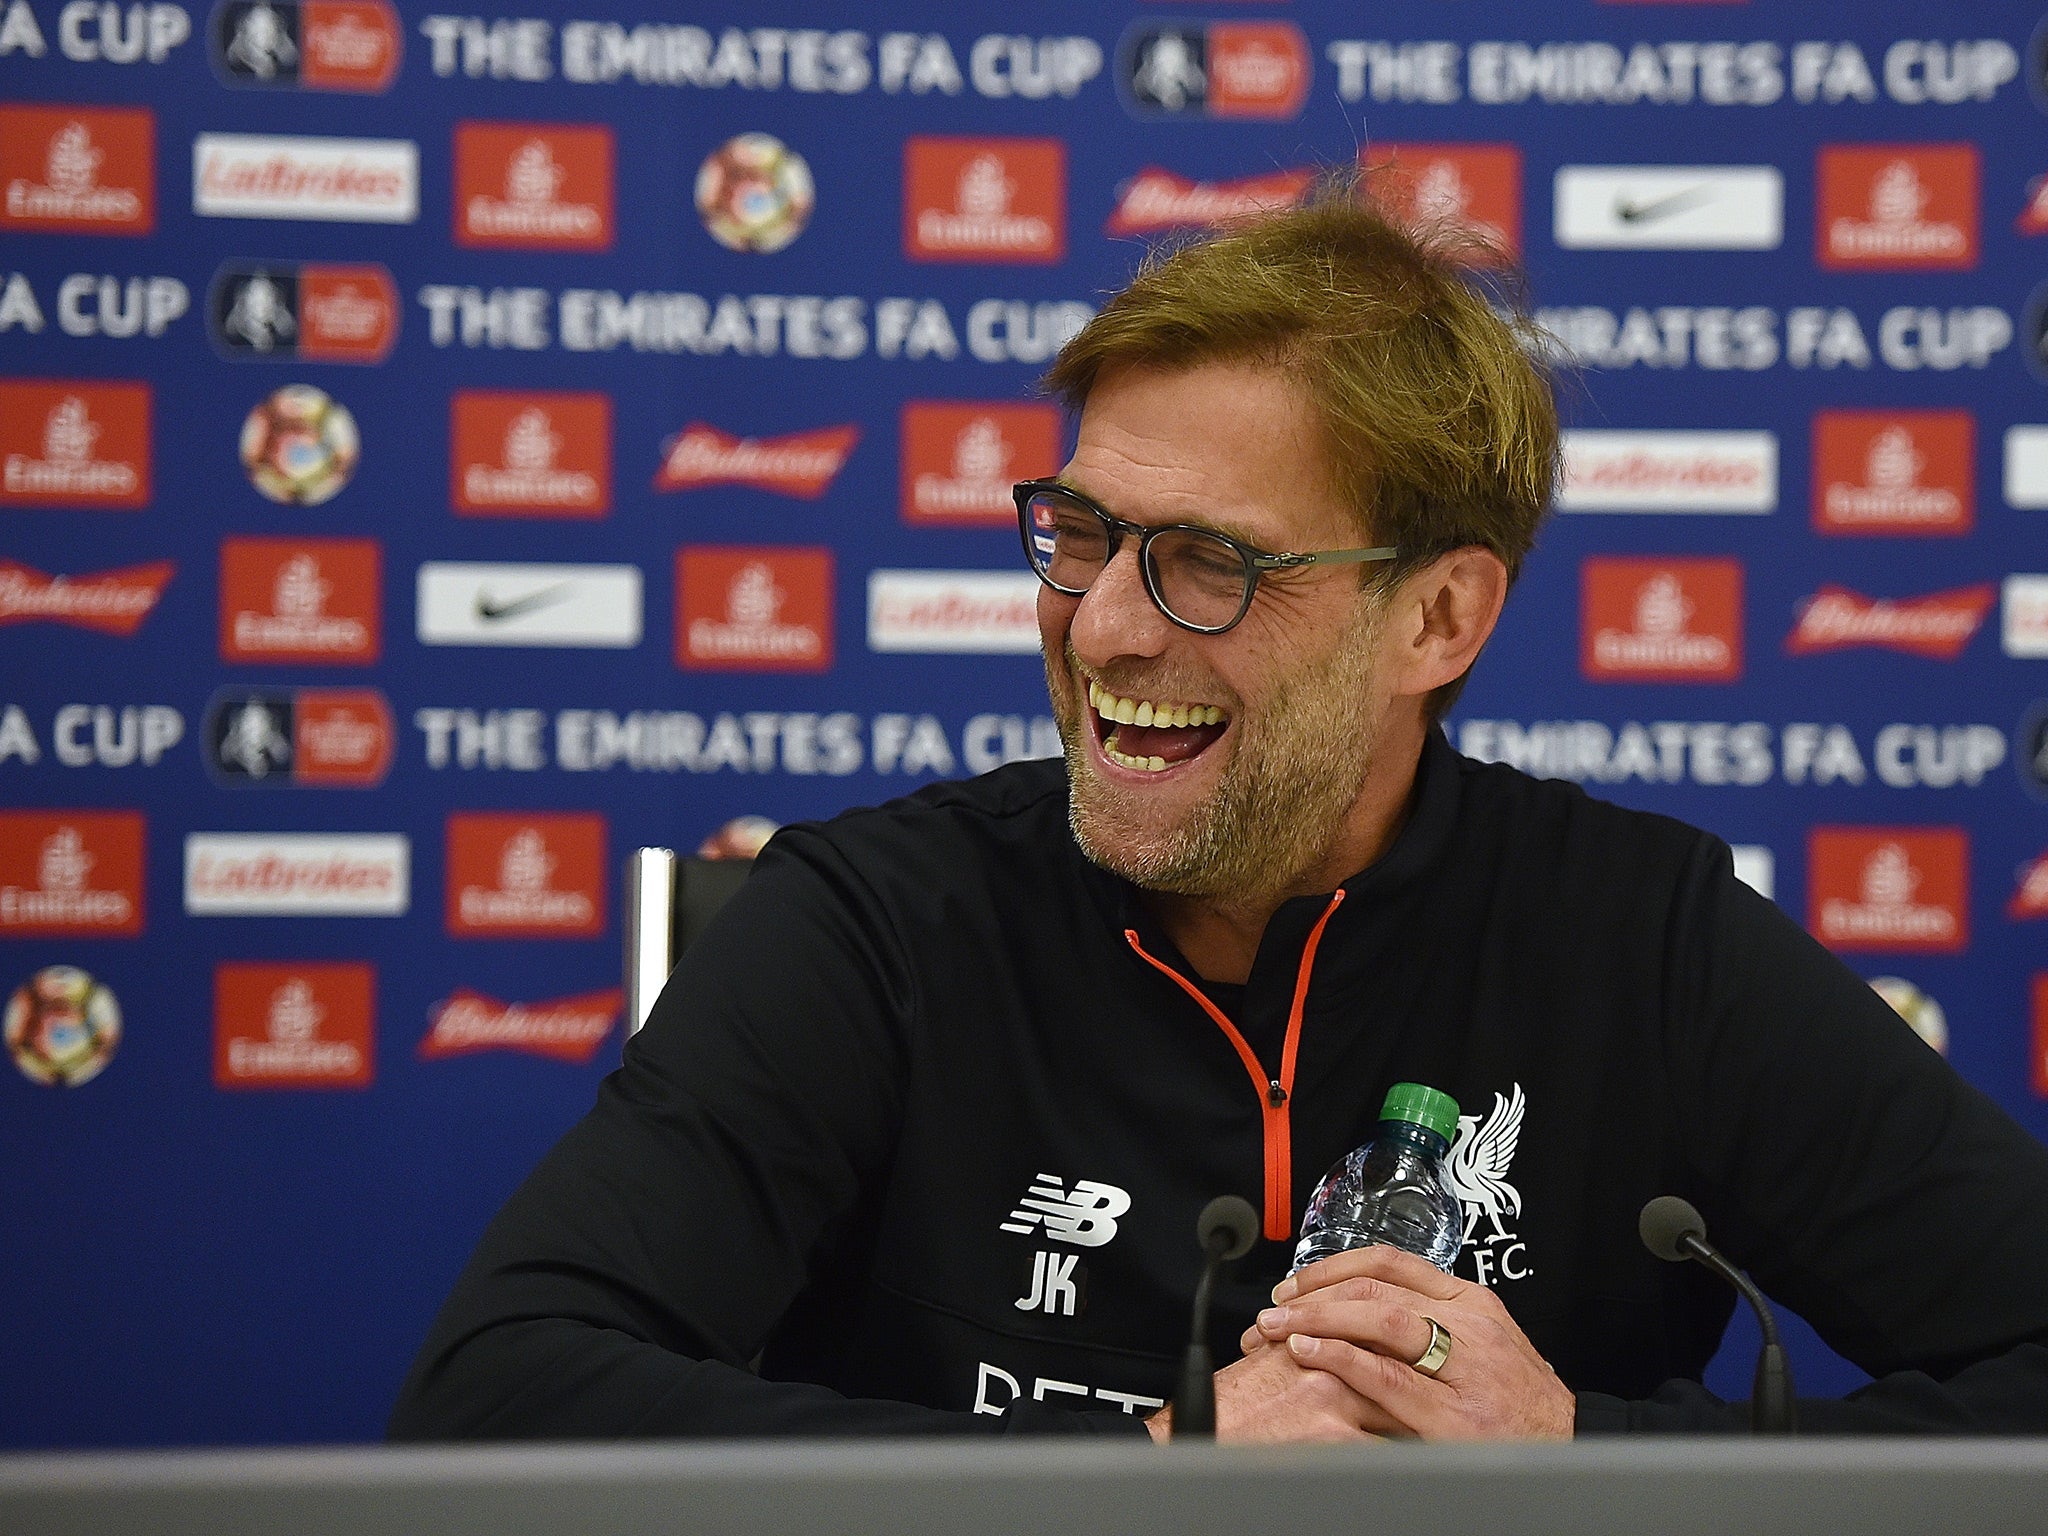 Klopp is not overly concerned by his side's poor start to the year